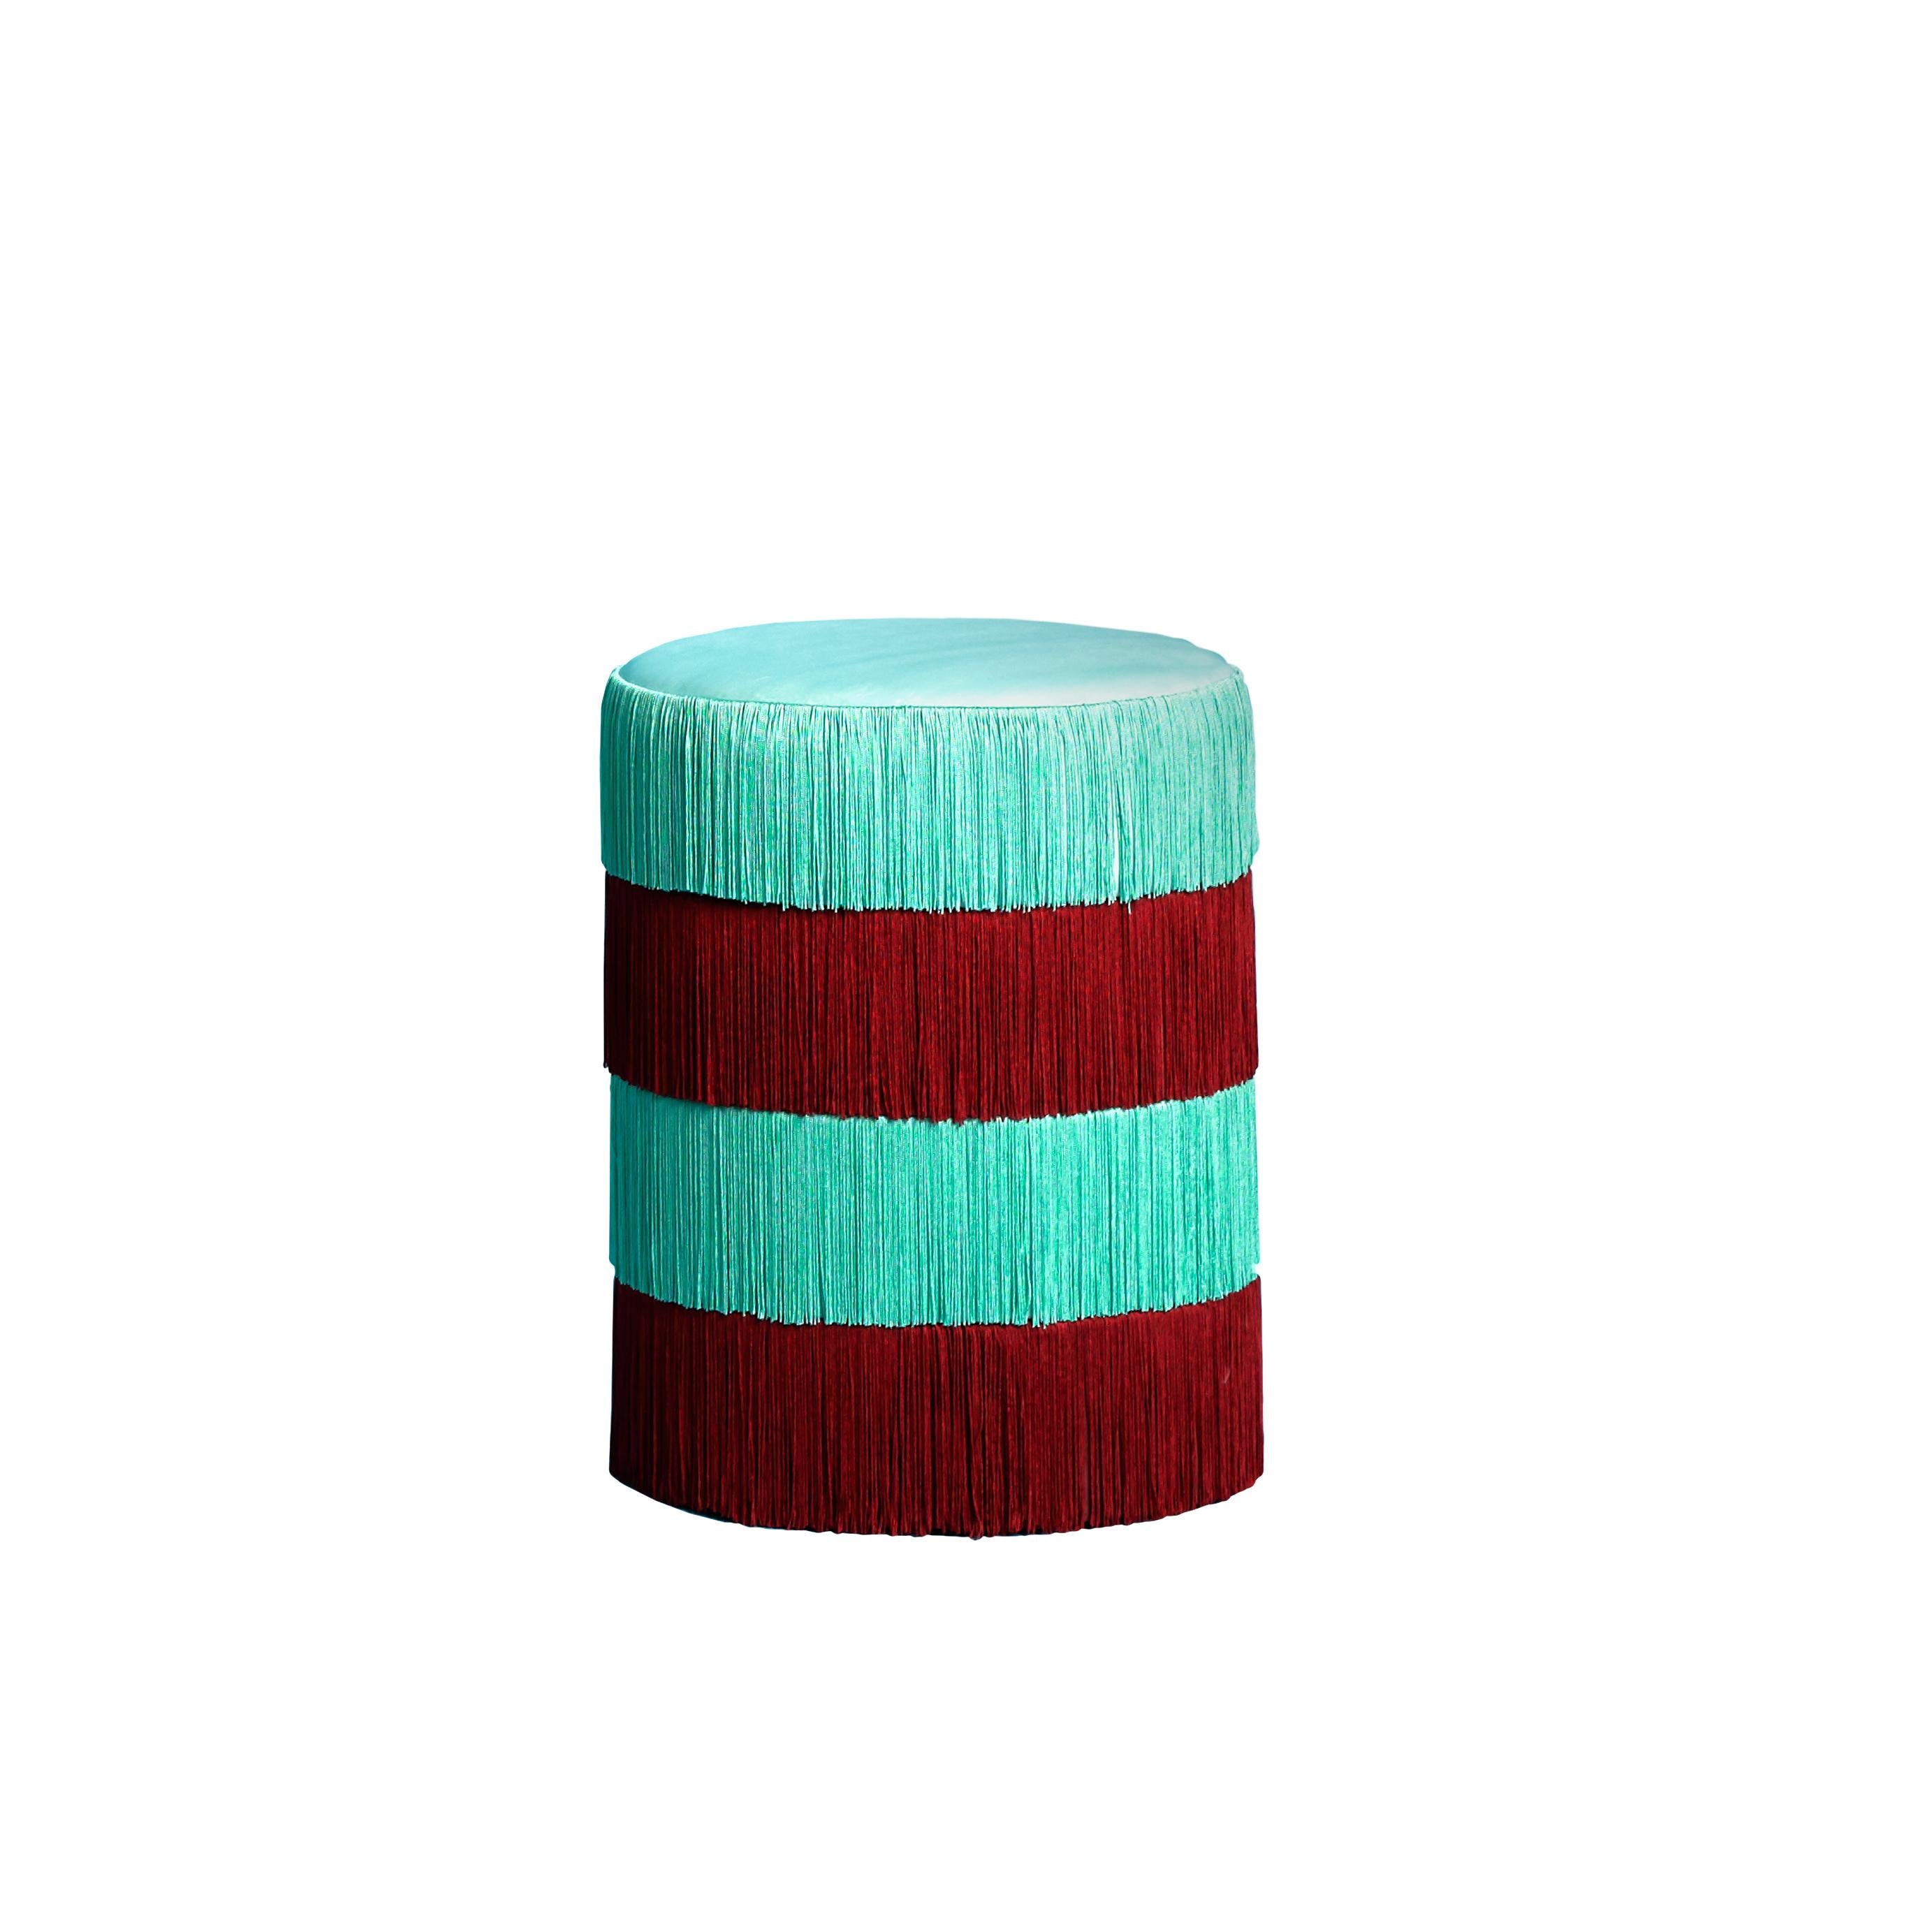 Spanish Chachacha Pouf by Houtique